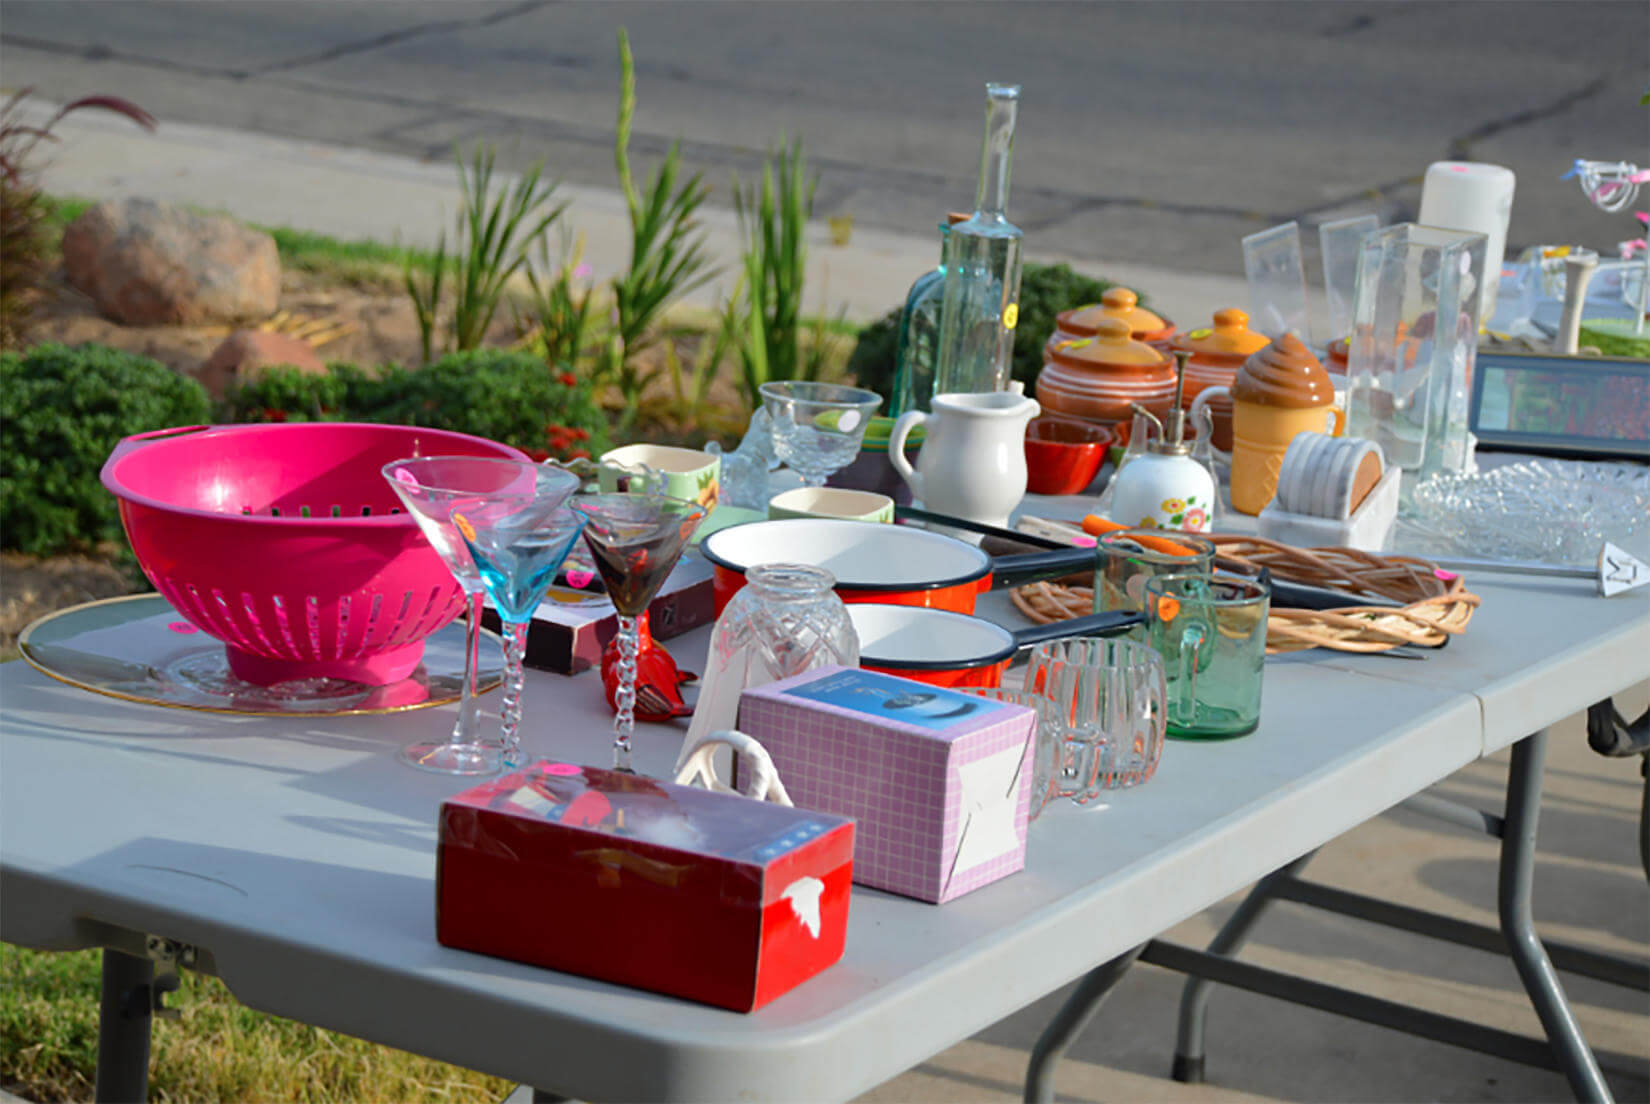 12 Garage Sale Items That Sell Like Hotcakes